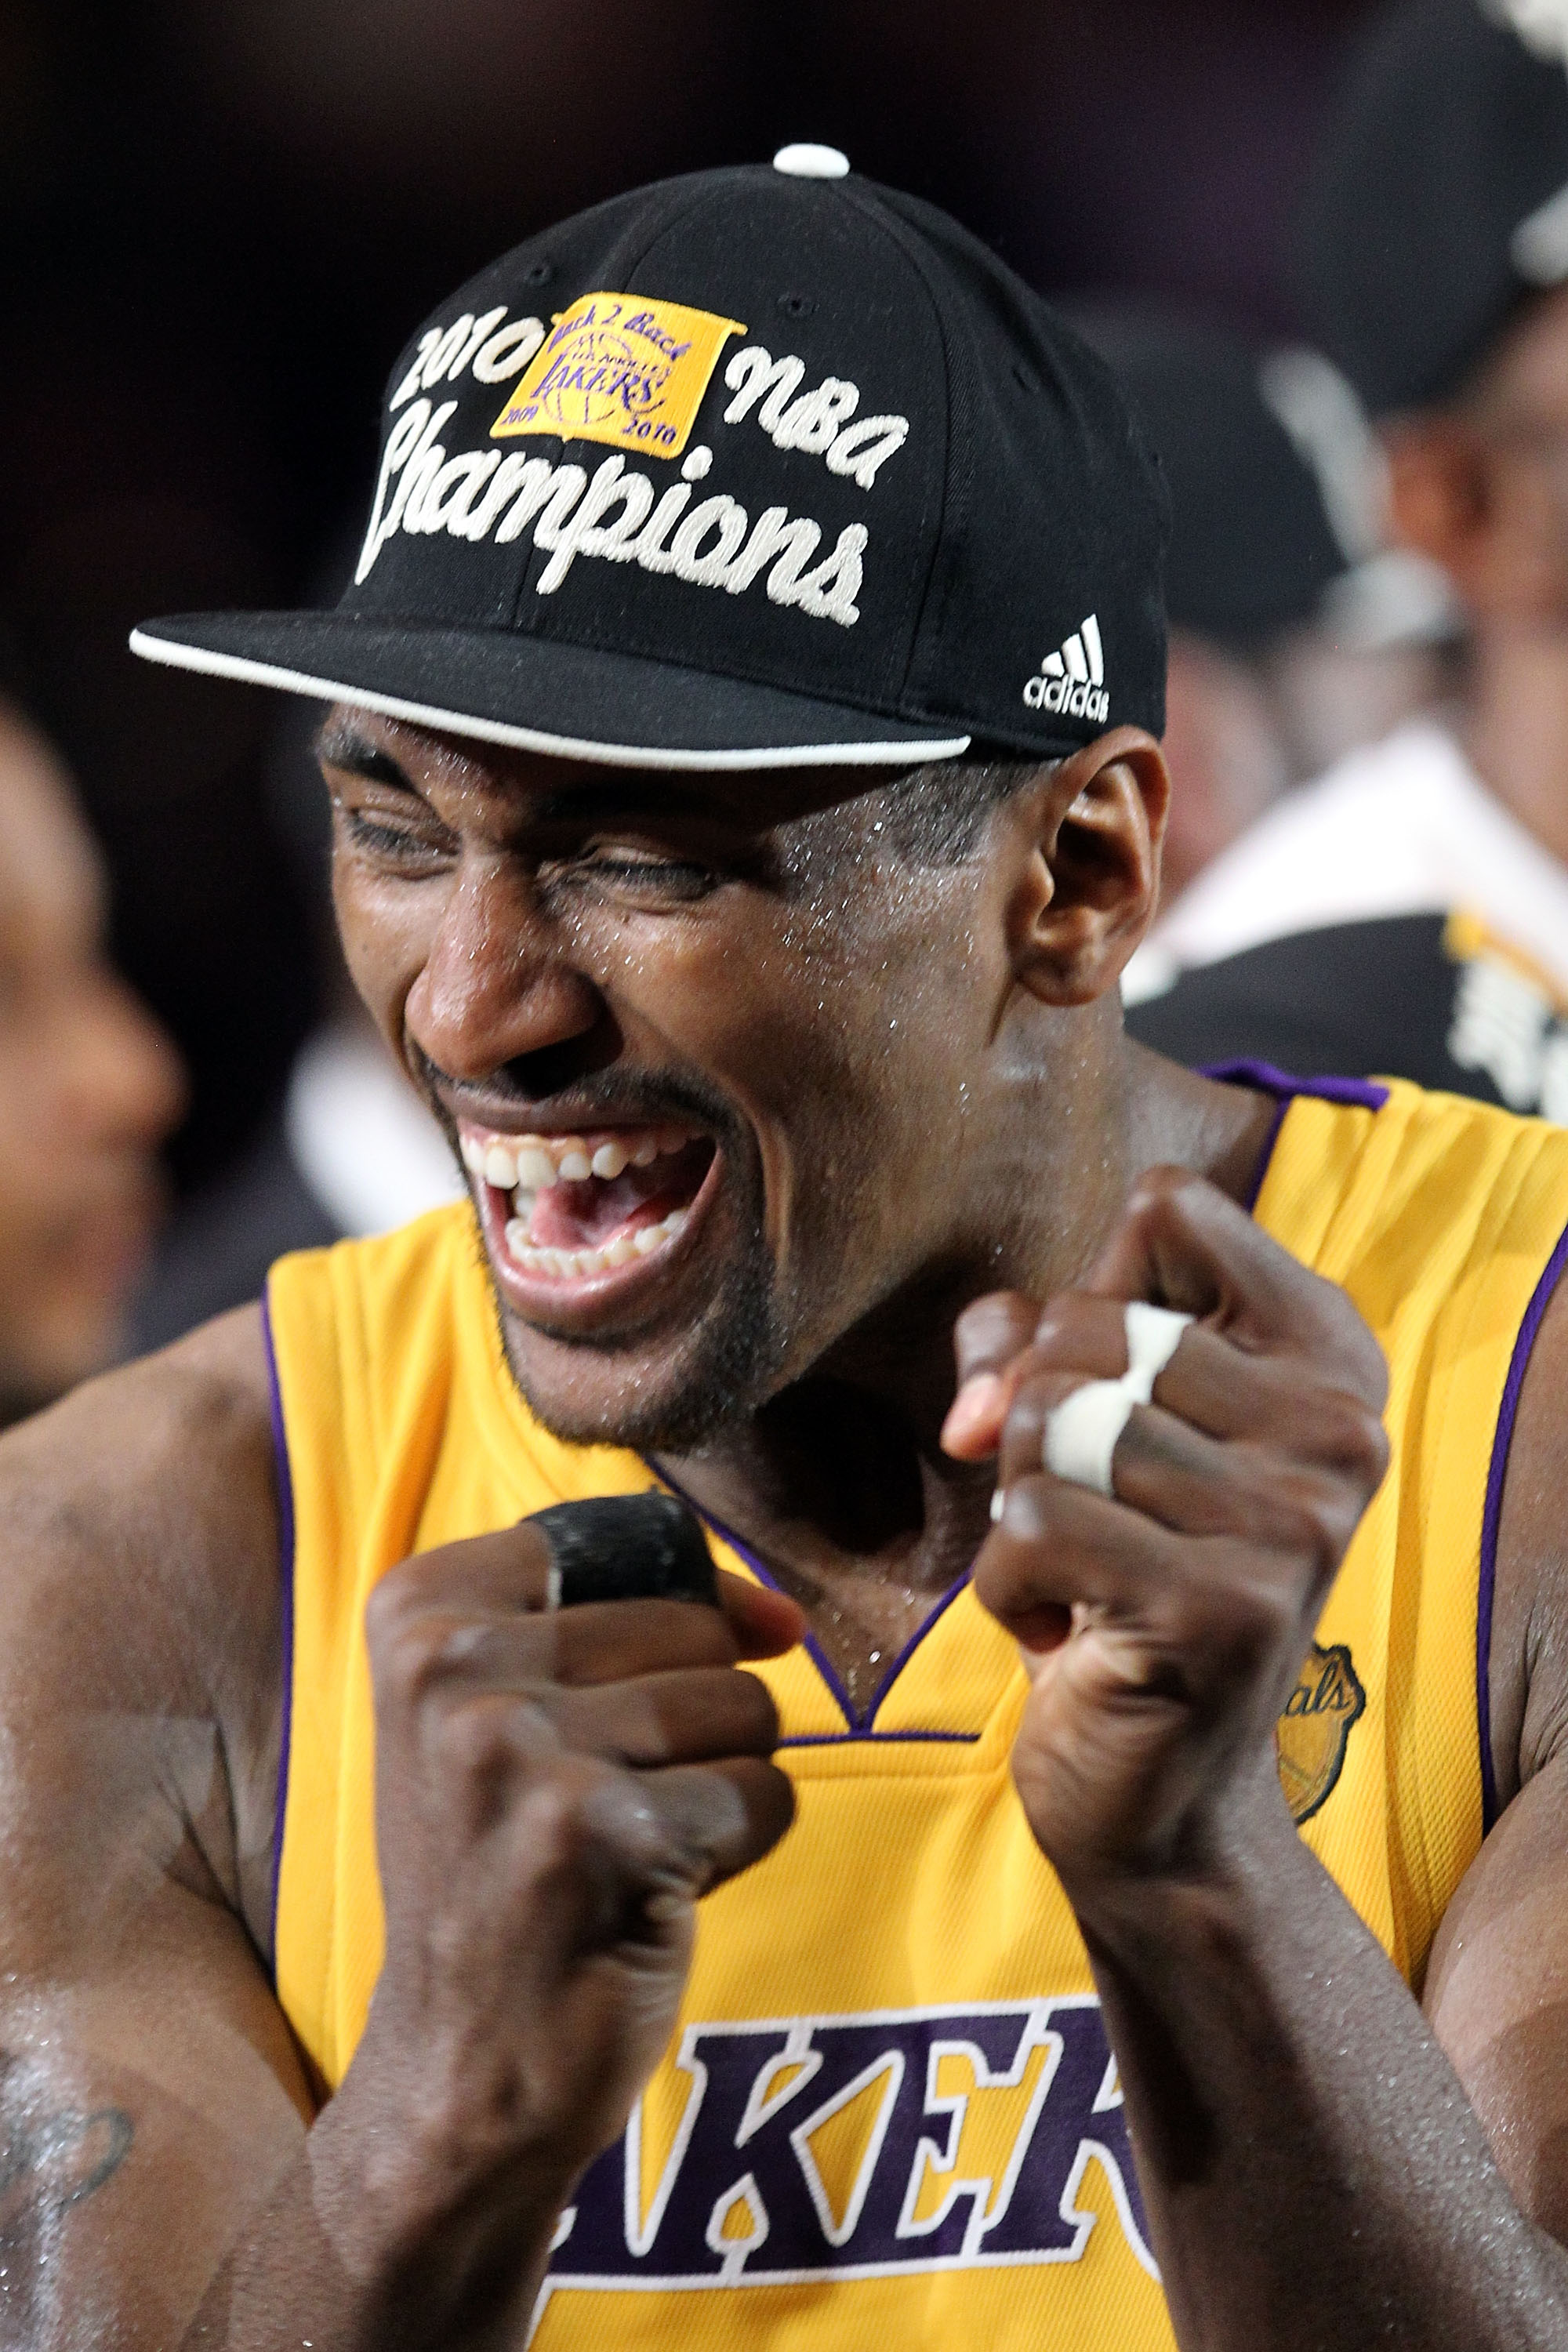 LOS ANGELES, CA - JUNE 17:  Ron Artest #37 of the Los Angeles Lakers celebrates after the Lakers defeated the Boston Celtics in Game Seven of the 2010 NBA Finals at Staples Center on June 17, 2010 in Los Angeles, California.  NOTE TO USER: User expressly